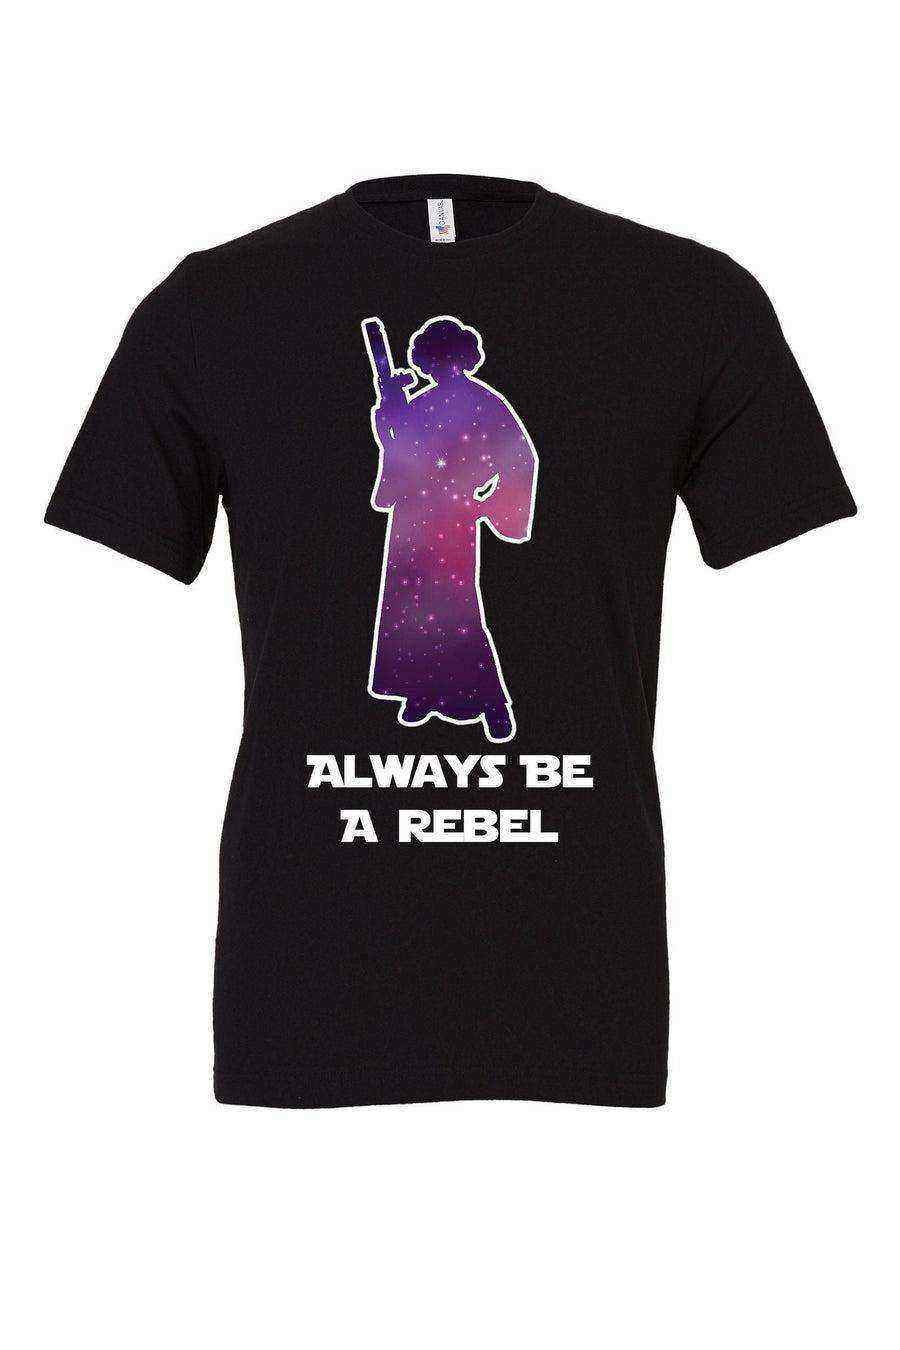 Womens | Star Wars Princess Leia Galaxy Background Tee | Always Be A Rebel - Dylan's Tees